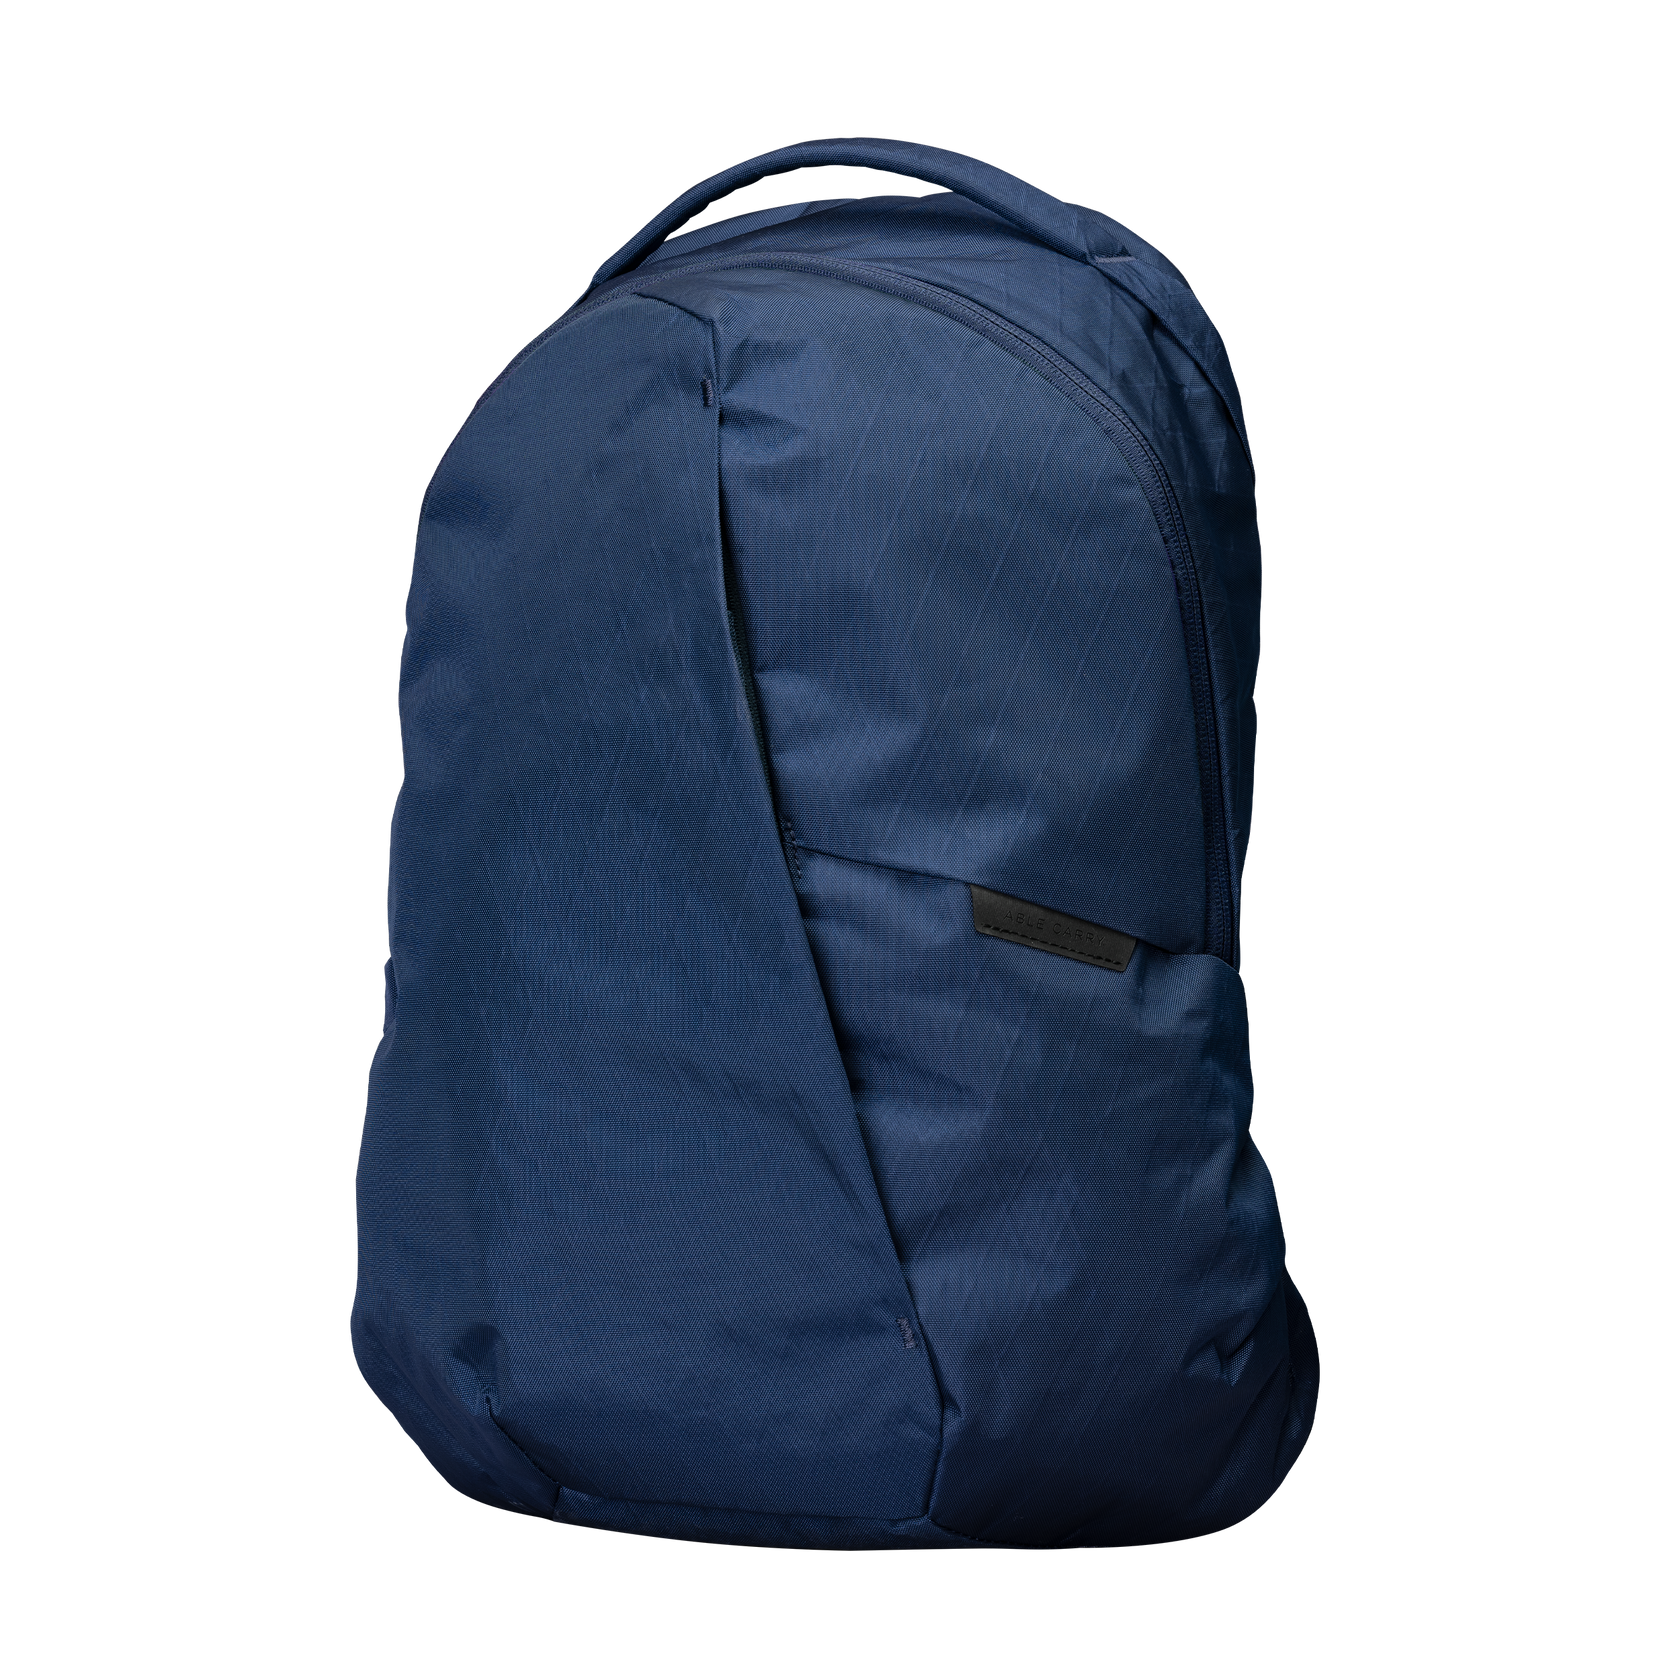 Able Carry Thirteen Daybag